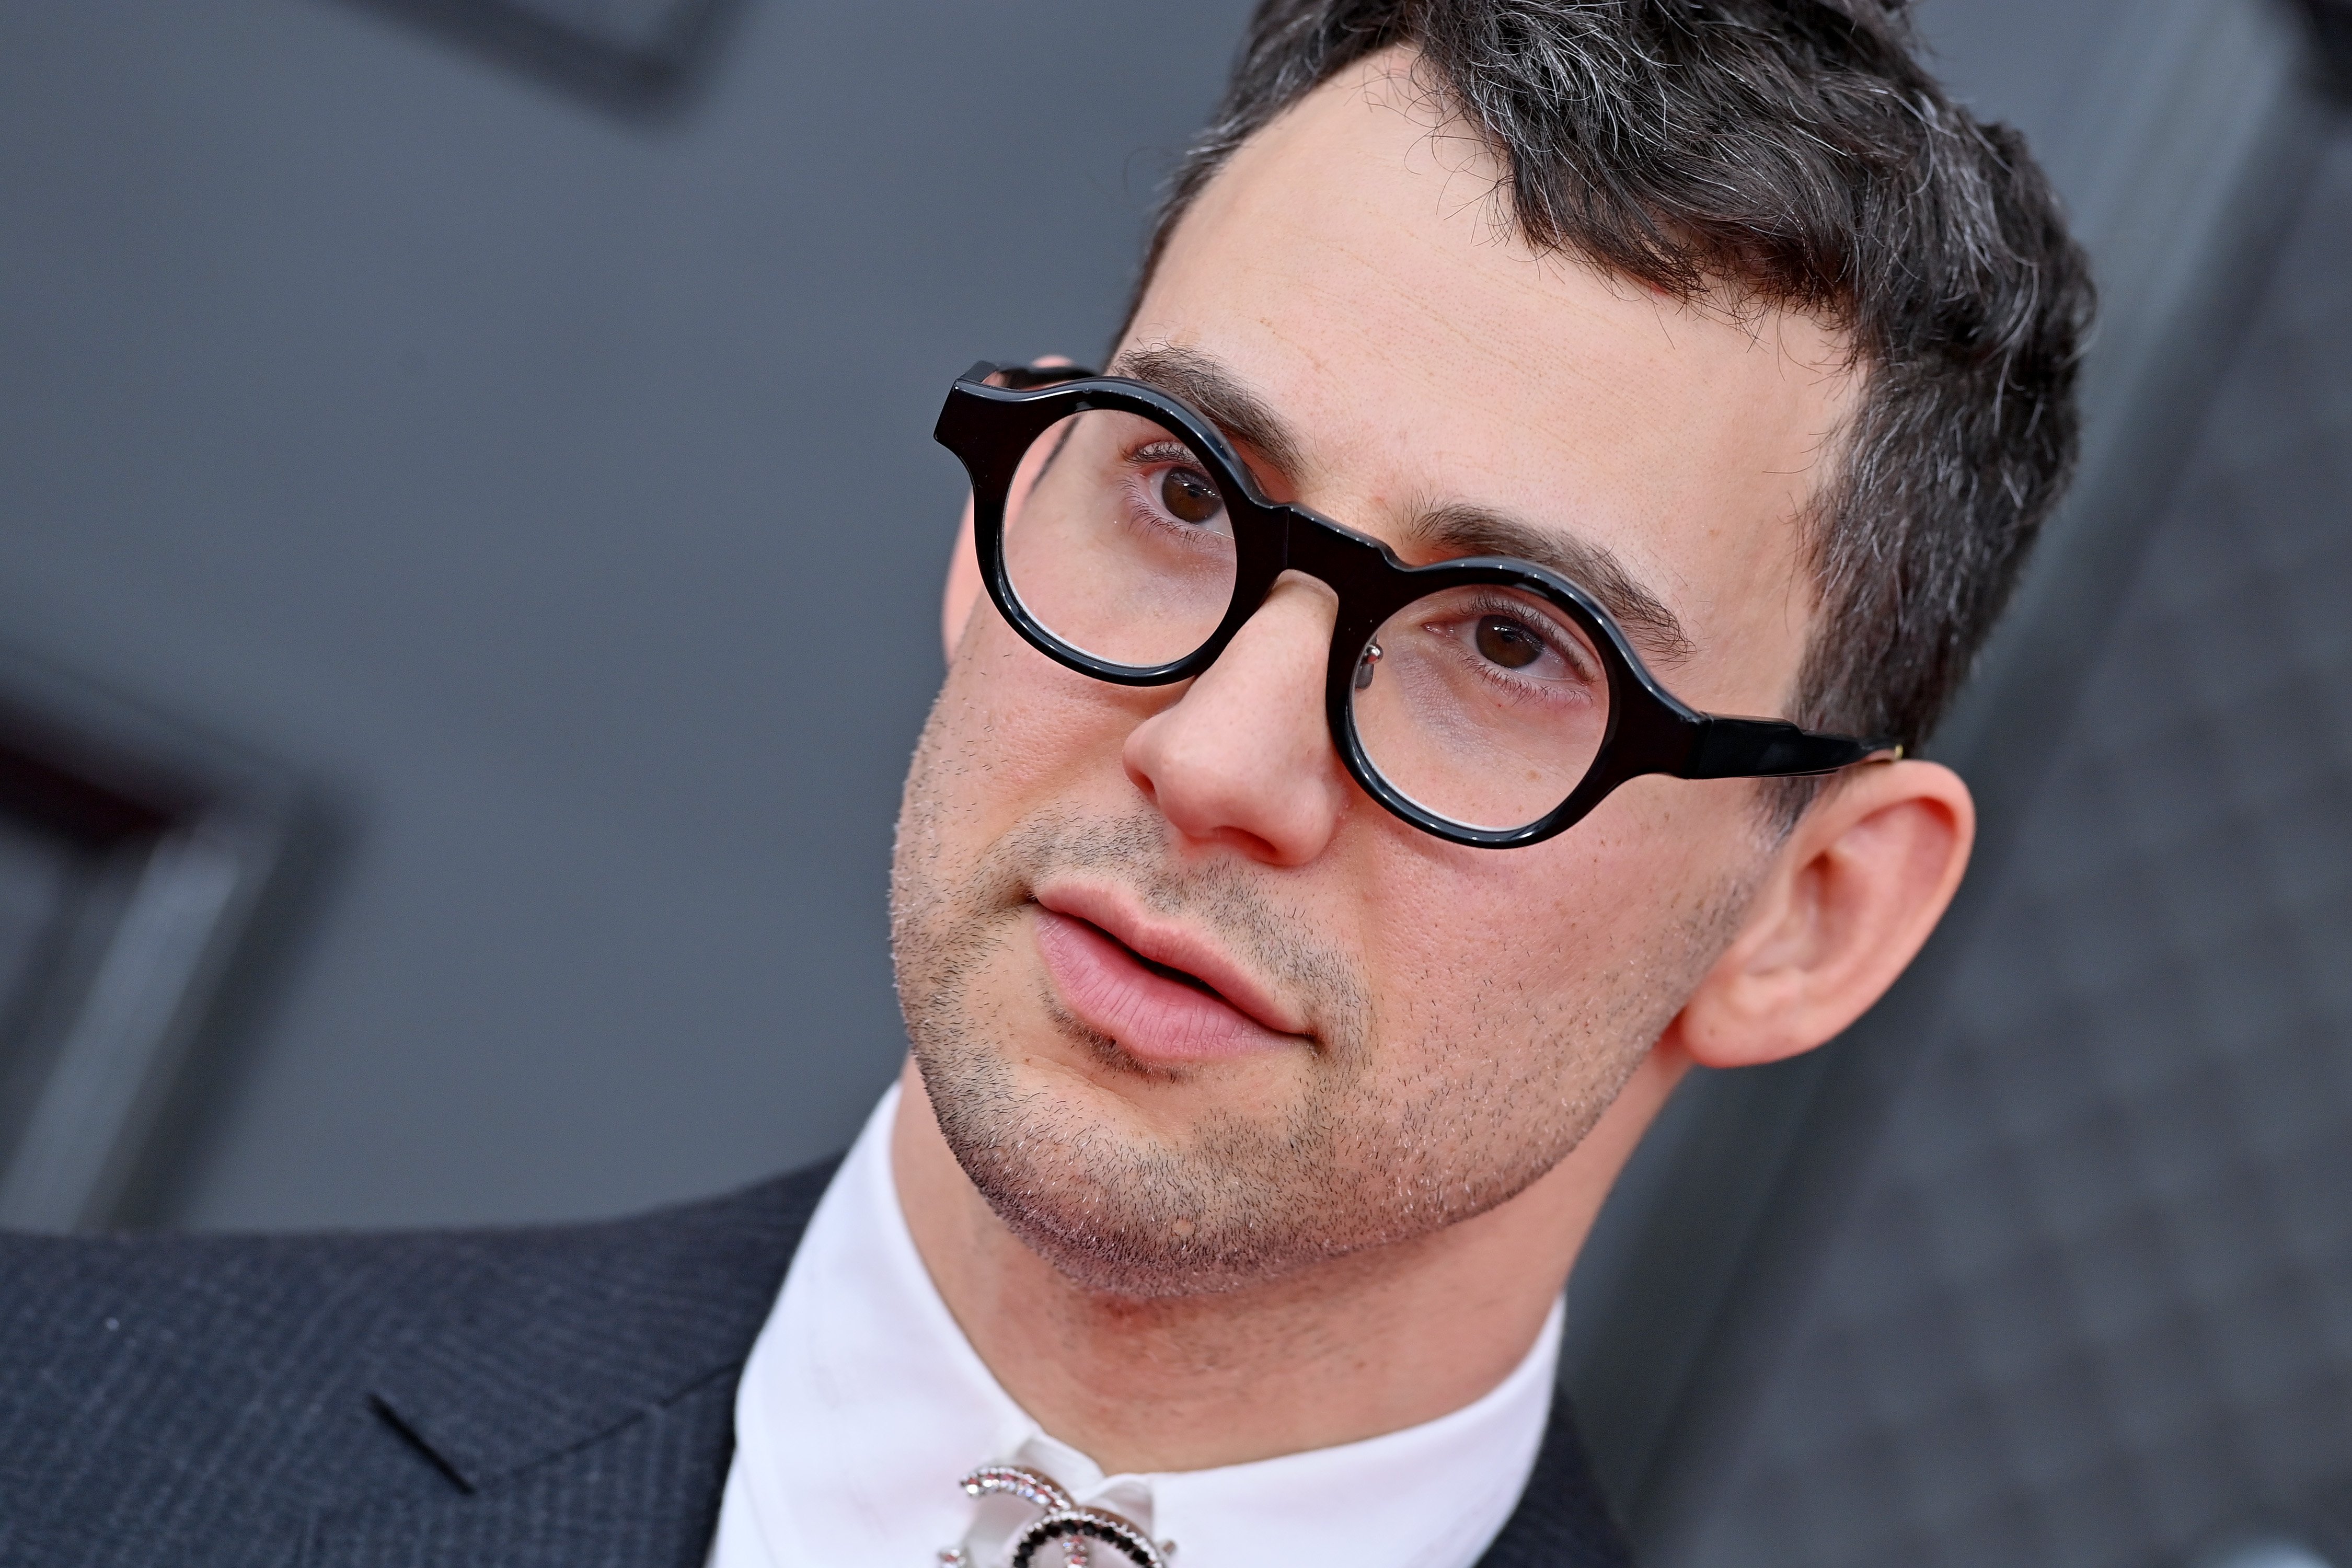 Jack Antonoff attends the 64th Annual GRAMMY Awards at MGM Grand Garden ArenaJack Antonoff attends the 64th Annual GRAMMY Awards at MGM Grand Garden Arena